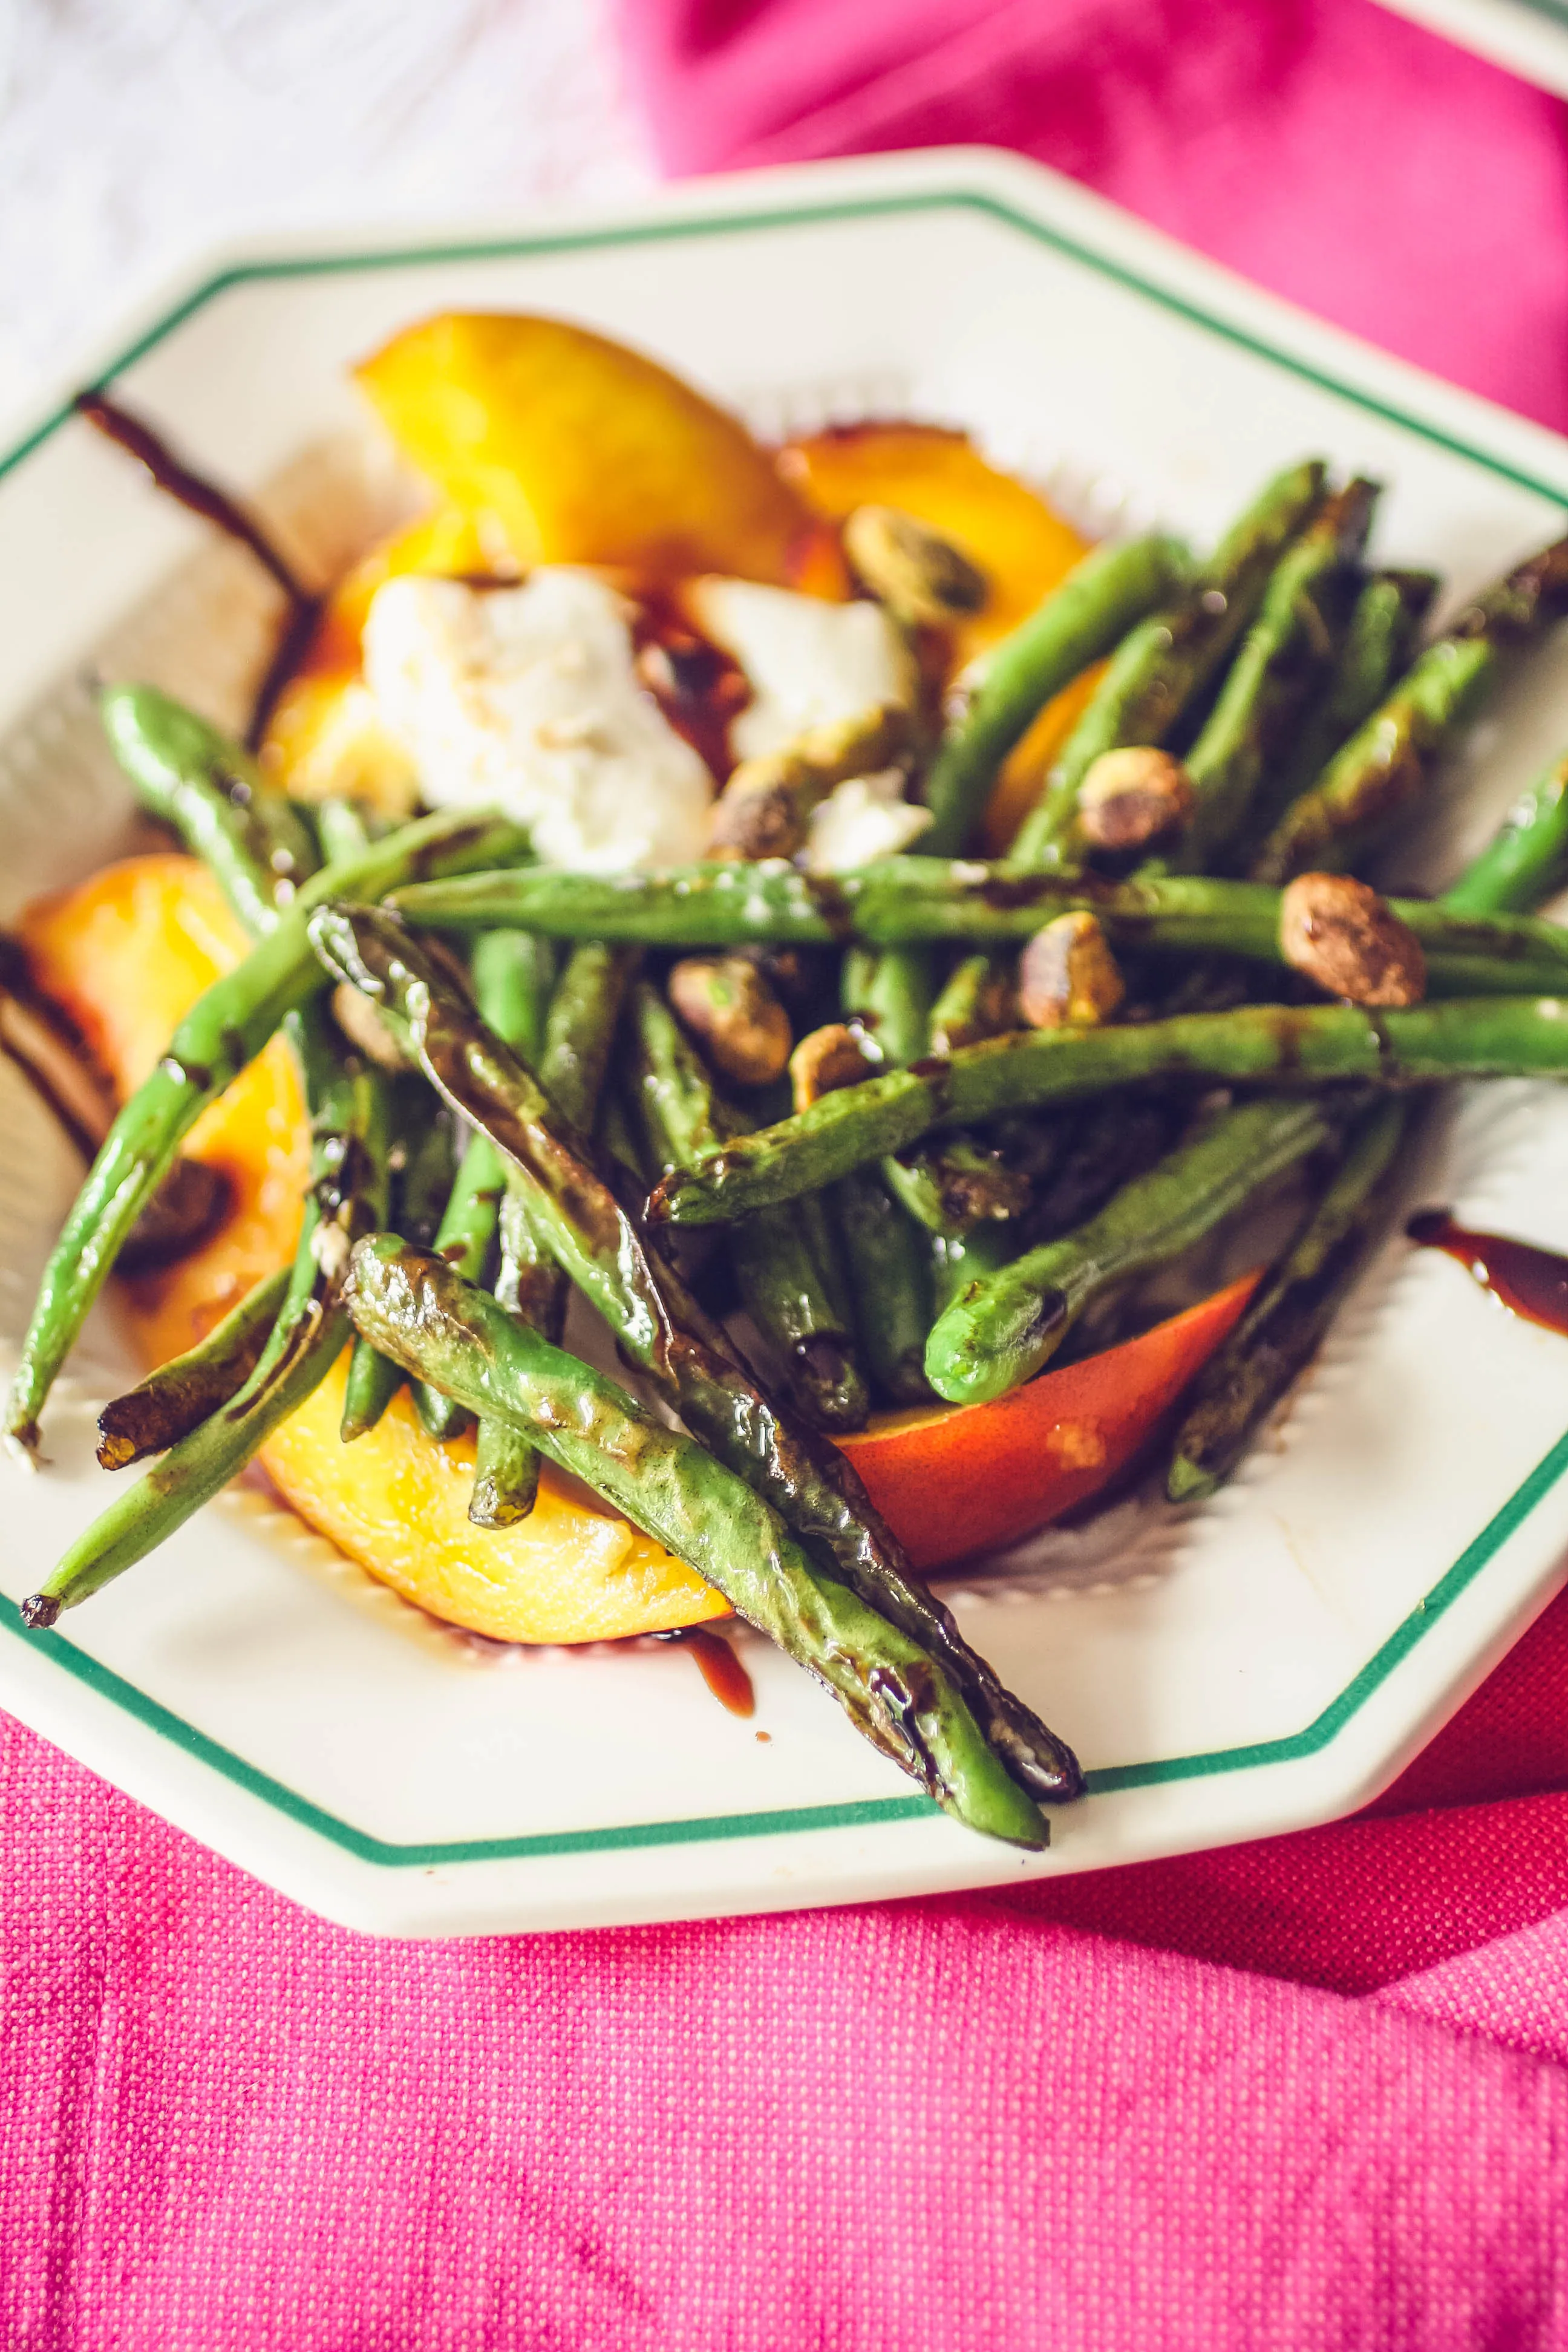 Charred Green Beans with Burrata and Peaches makes a delightful summer salad! Charred Green Beans with Burrata and Peaches is a lovely salad to serve this summer.